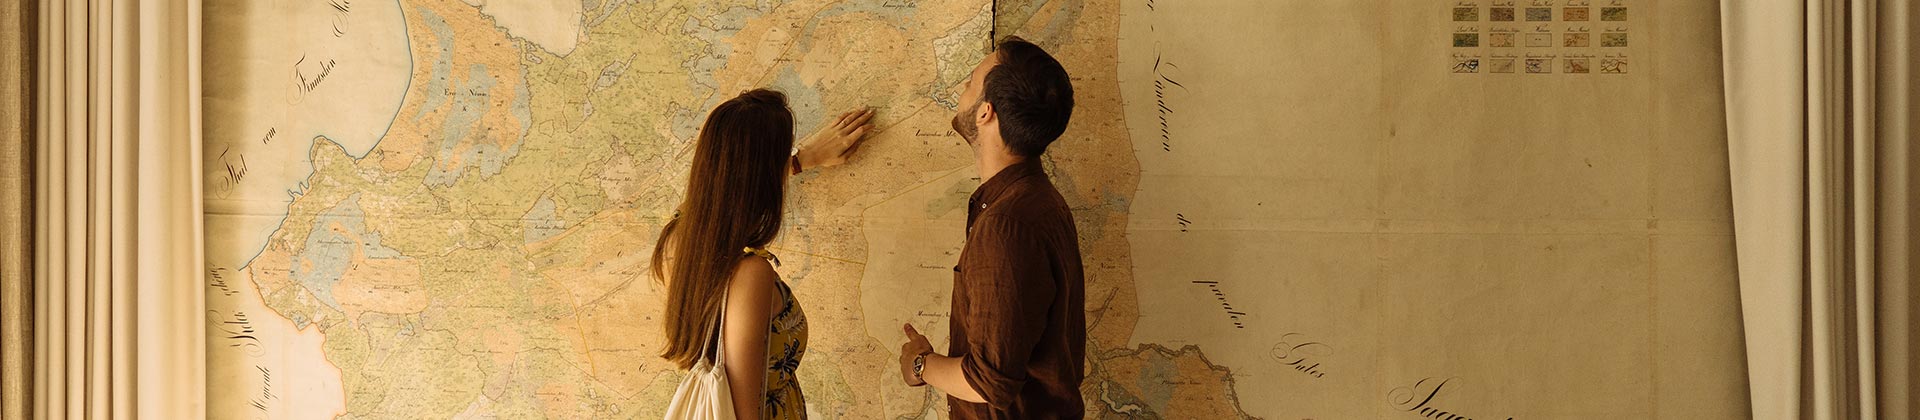 Couple in front of large map by Andri Peetso